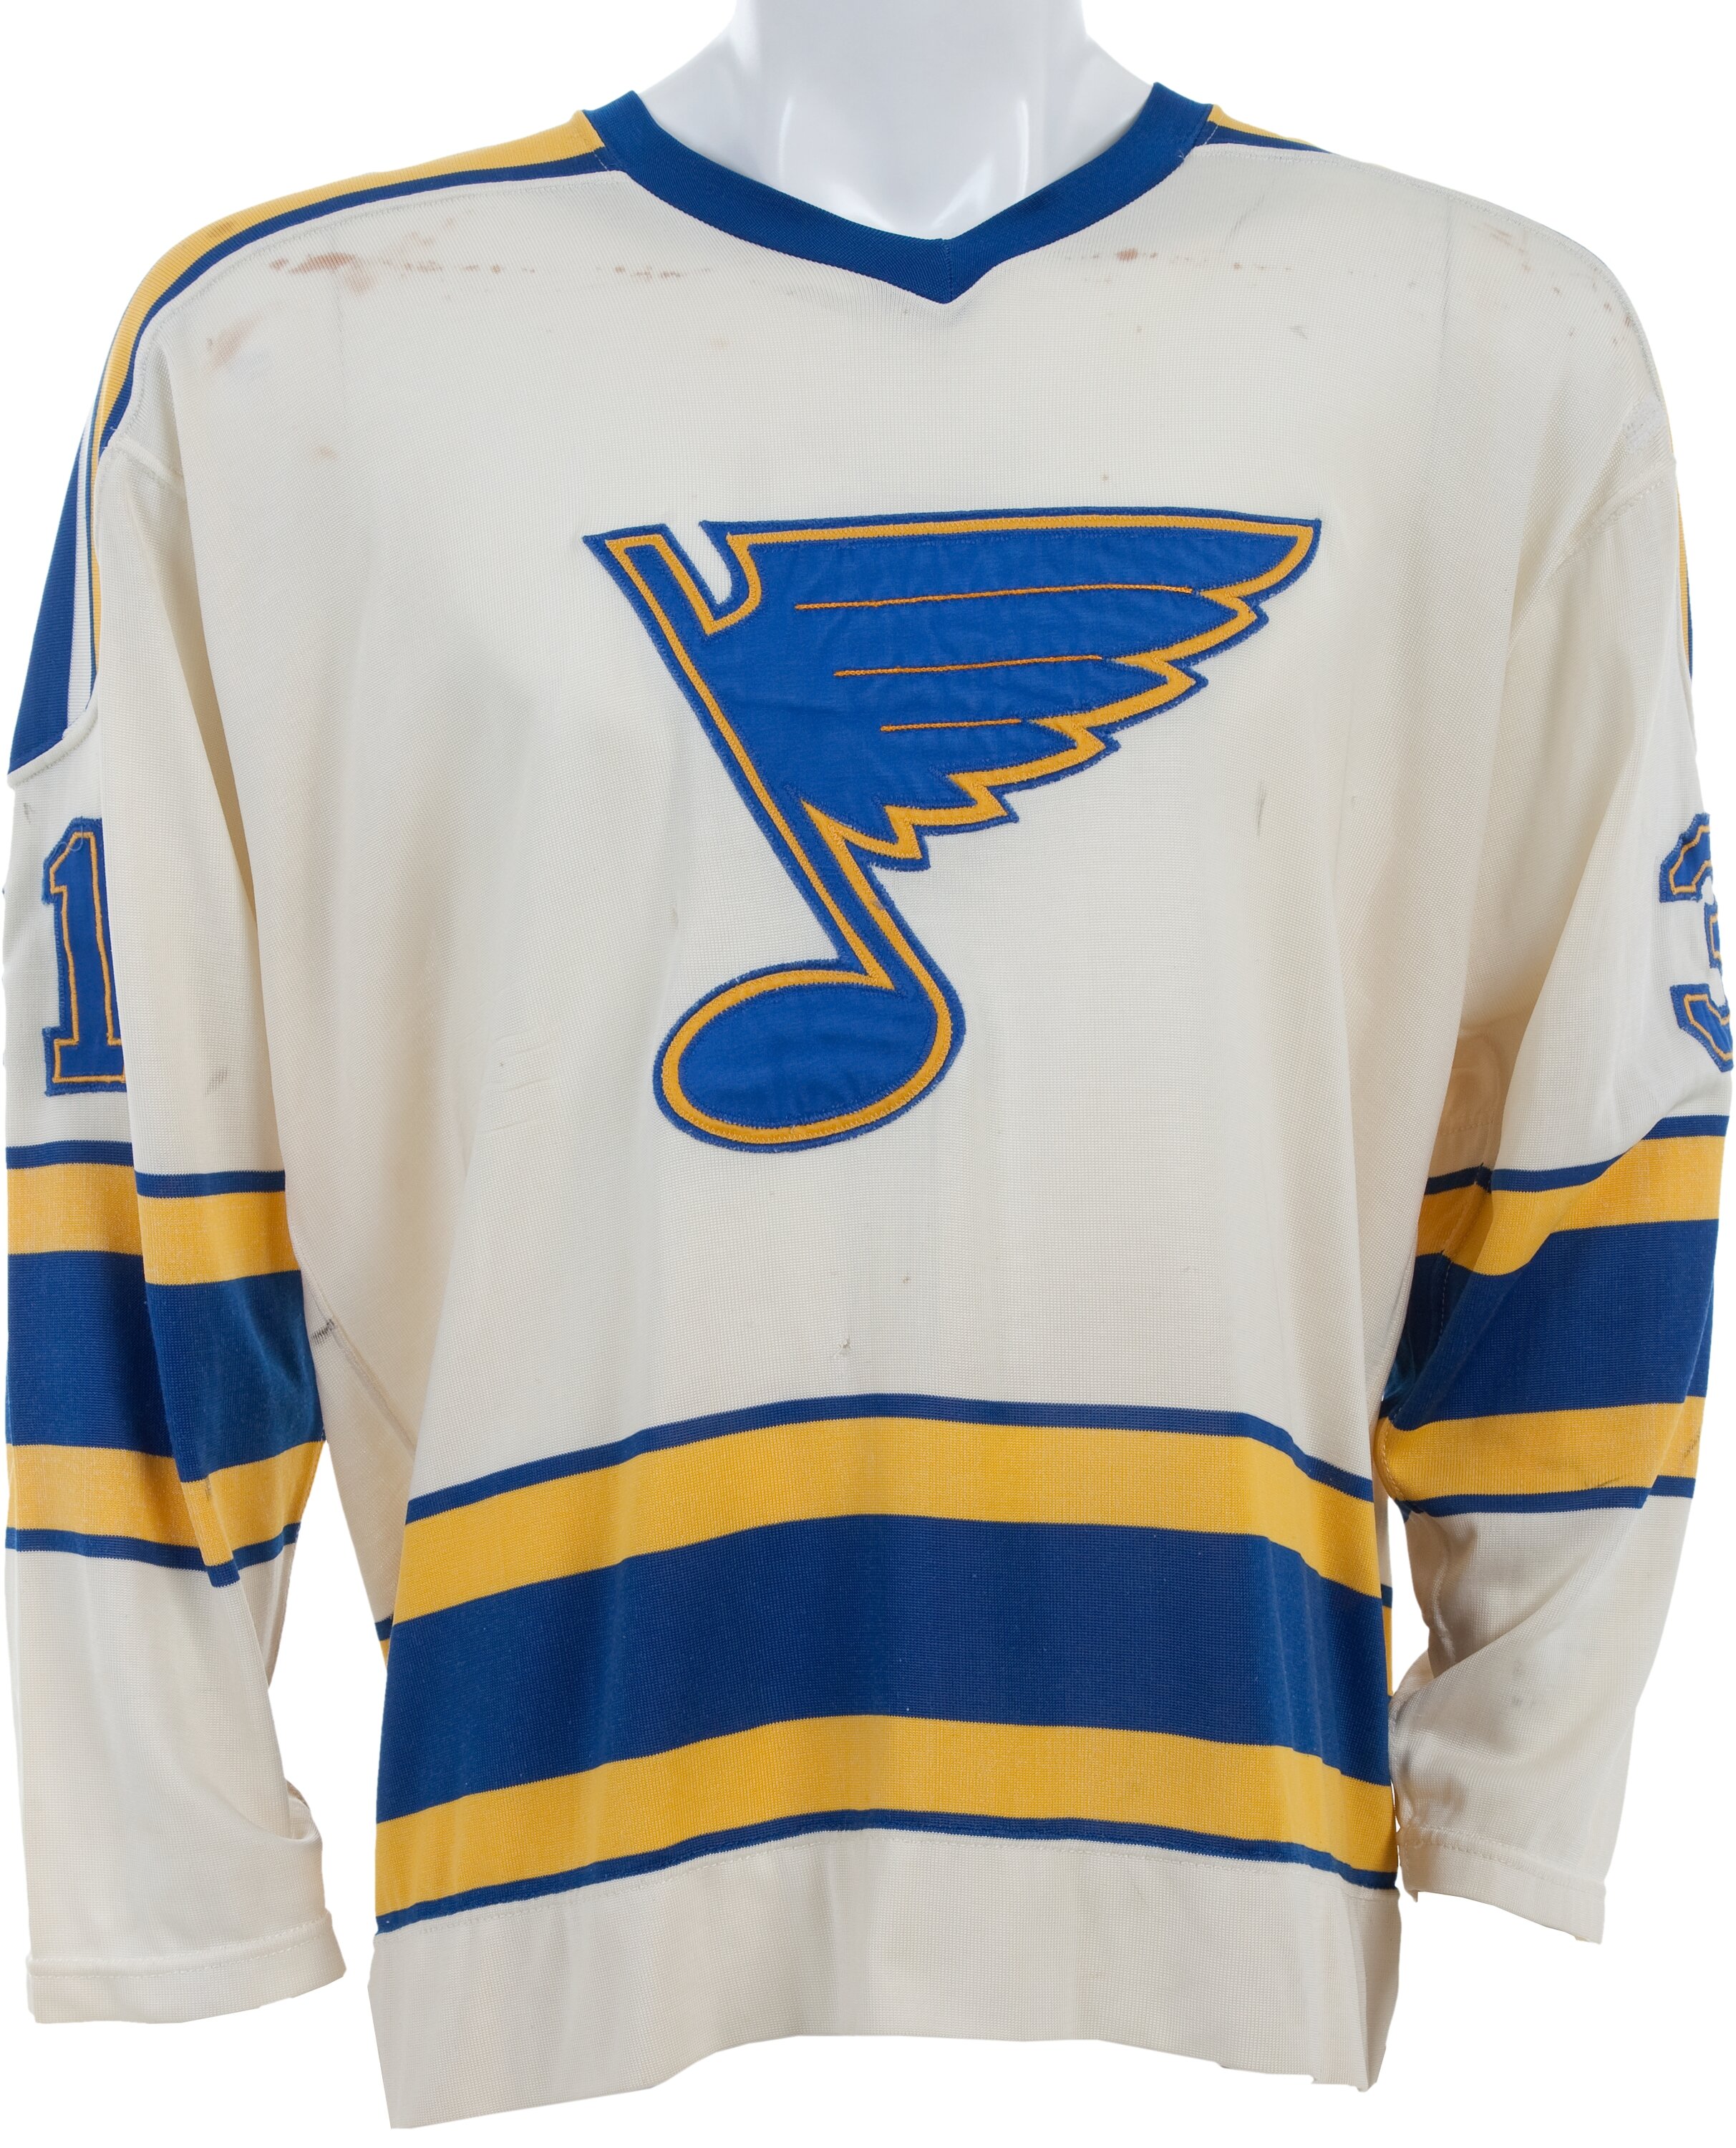 St. Louis Blues - Bid now on the game-worn jerseys from the home